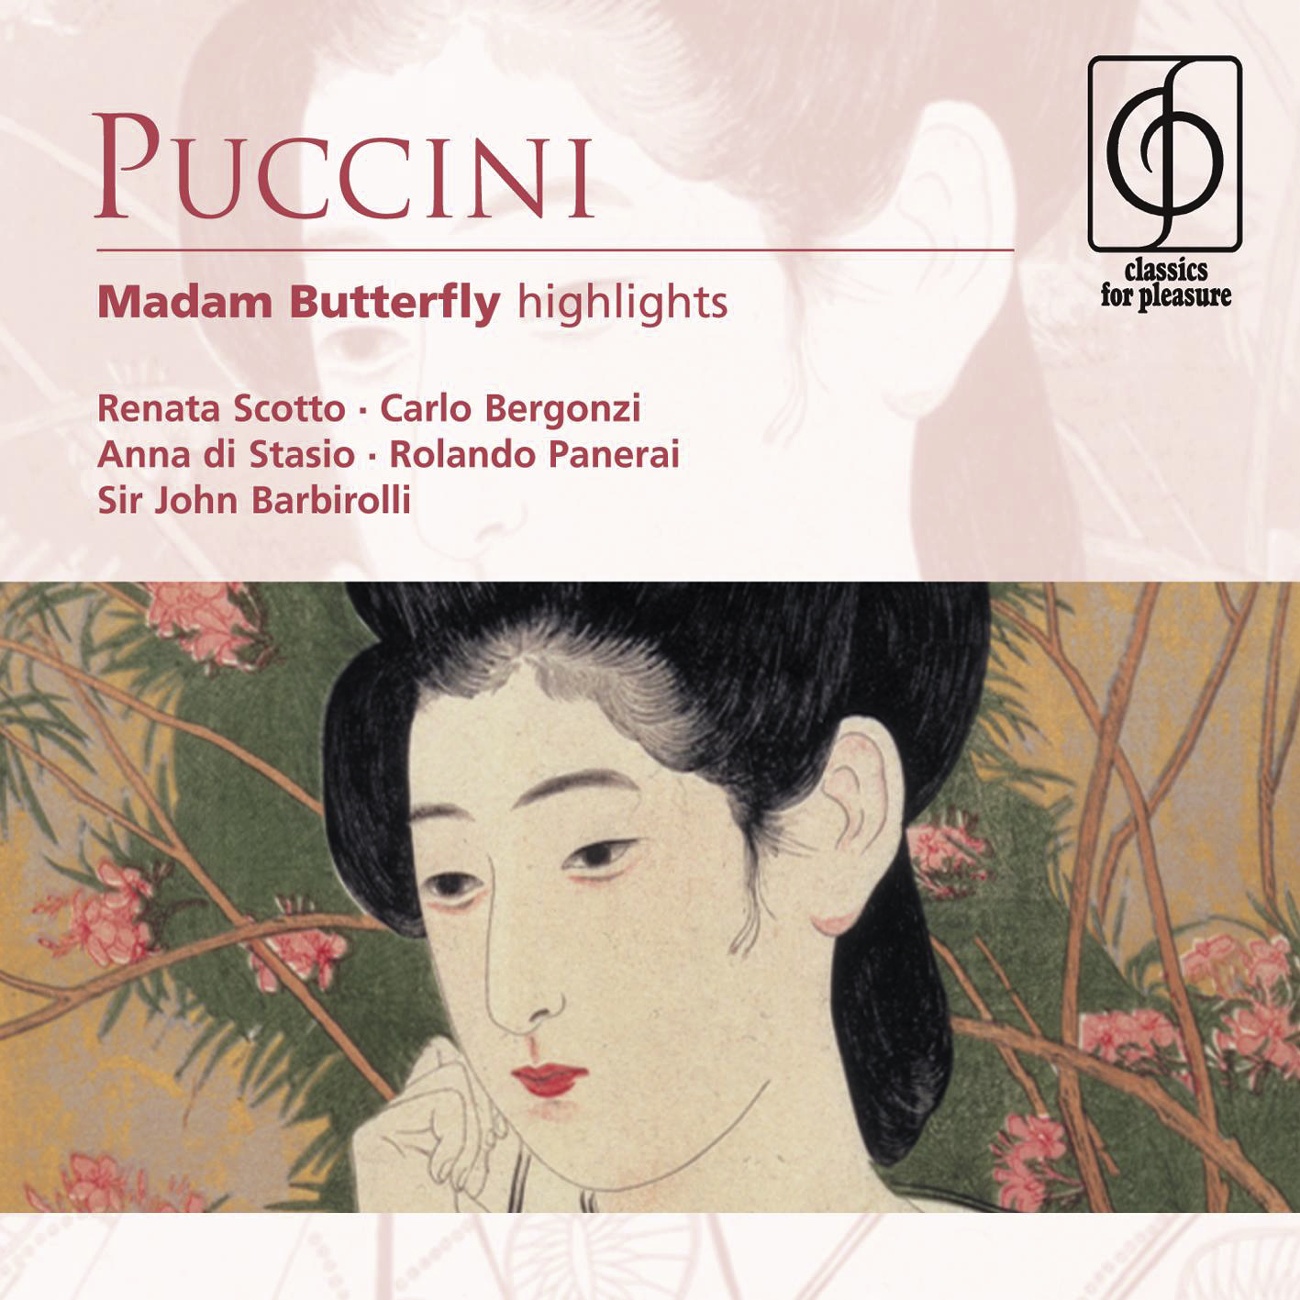 Puccini: Madam Butterfly (highlights)